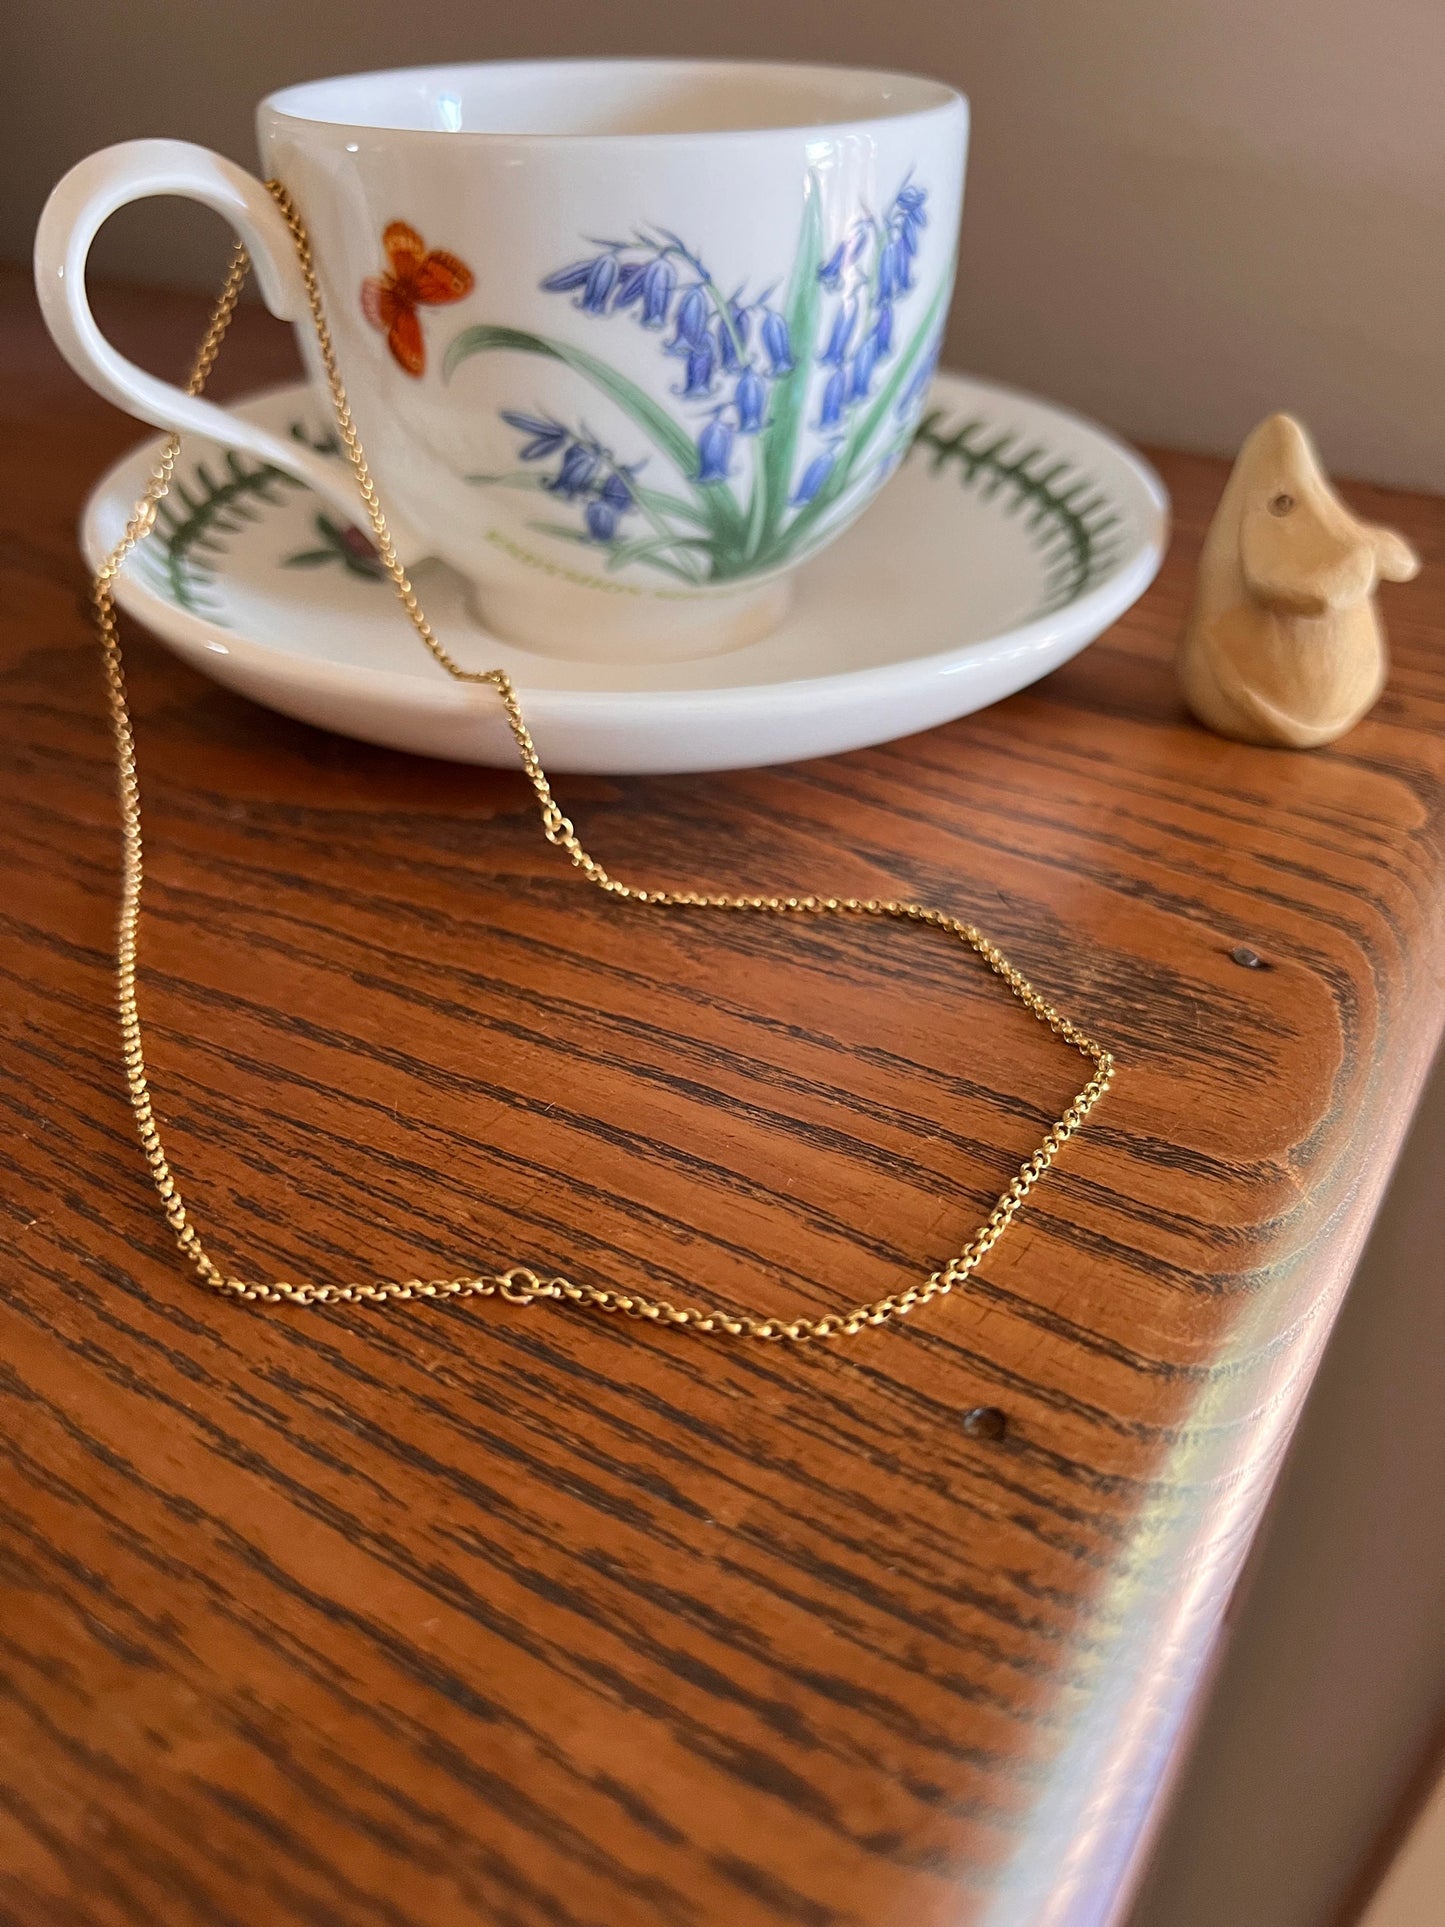 VICTORIAN Antique Dainty 14k Gold Cable Chain Necklace Pendant Charm Holder Romantic Gift Timeless Glowing Patina Neckmess Neckstack